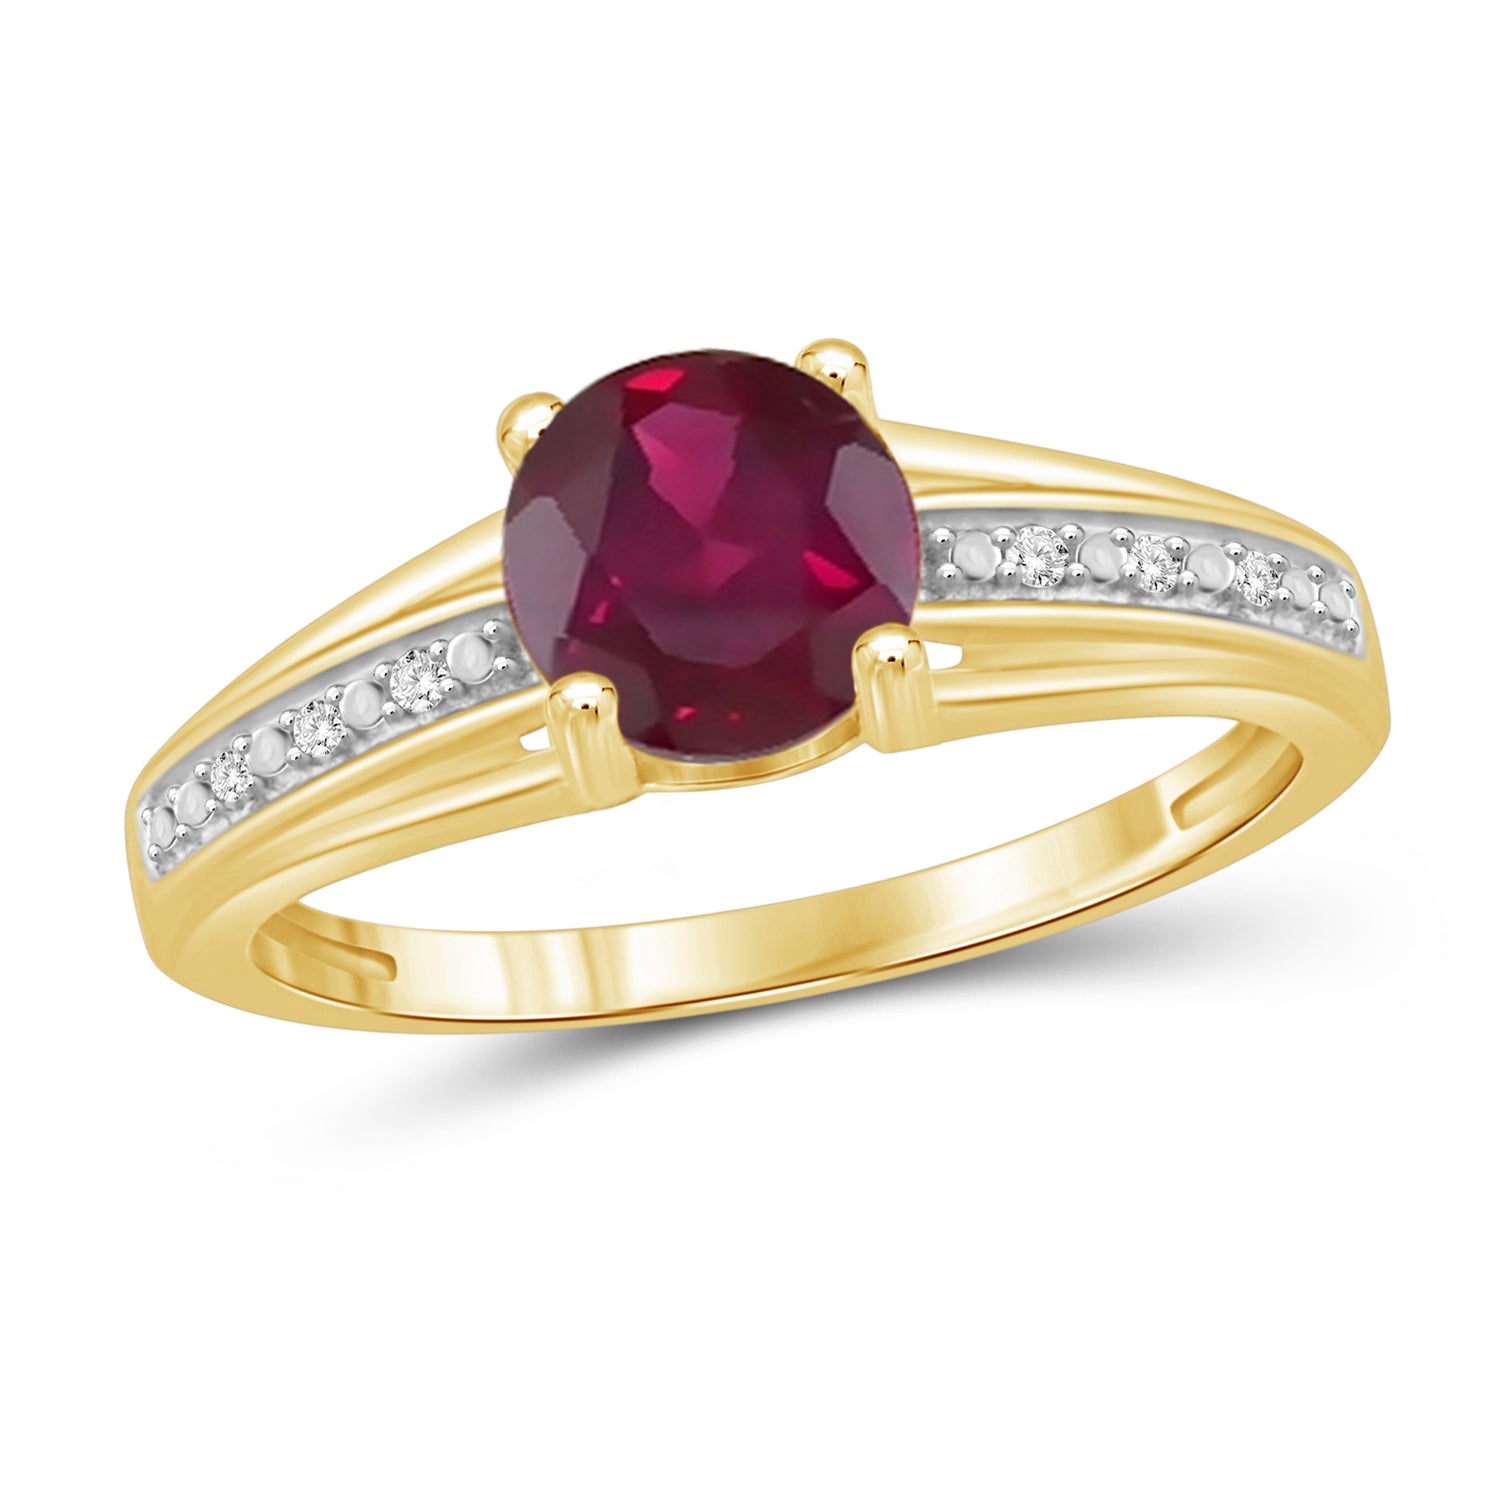 1.20 Carat T.G.W. Ruby Gemstone and 1/20 Carat T.W. White Diamond 14K Gold-plated Ring